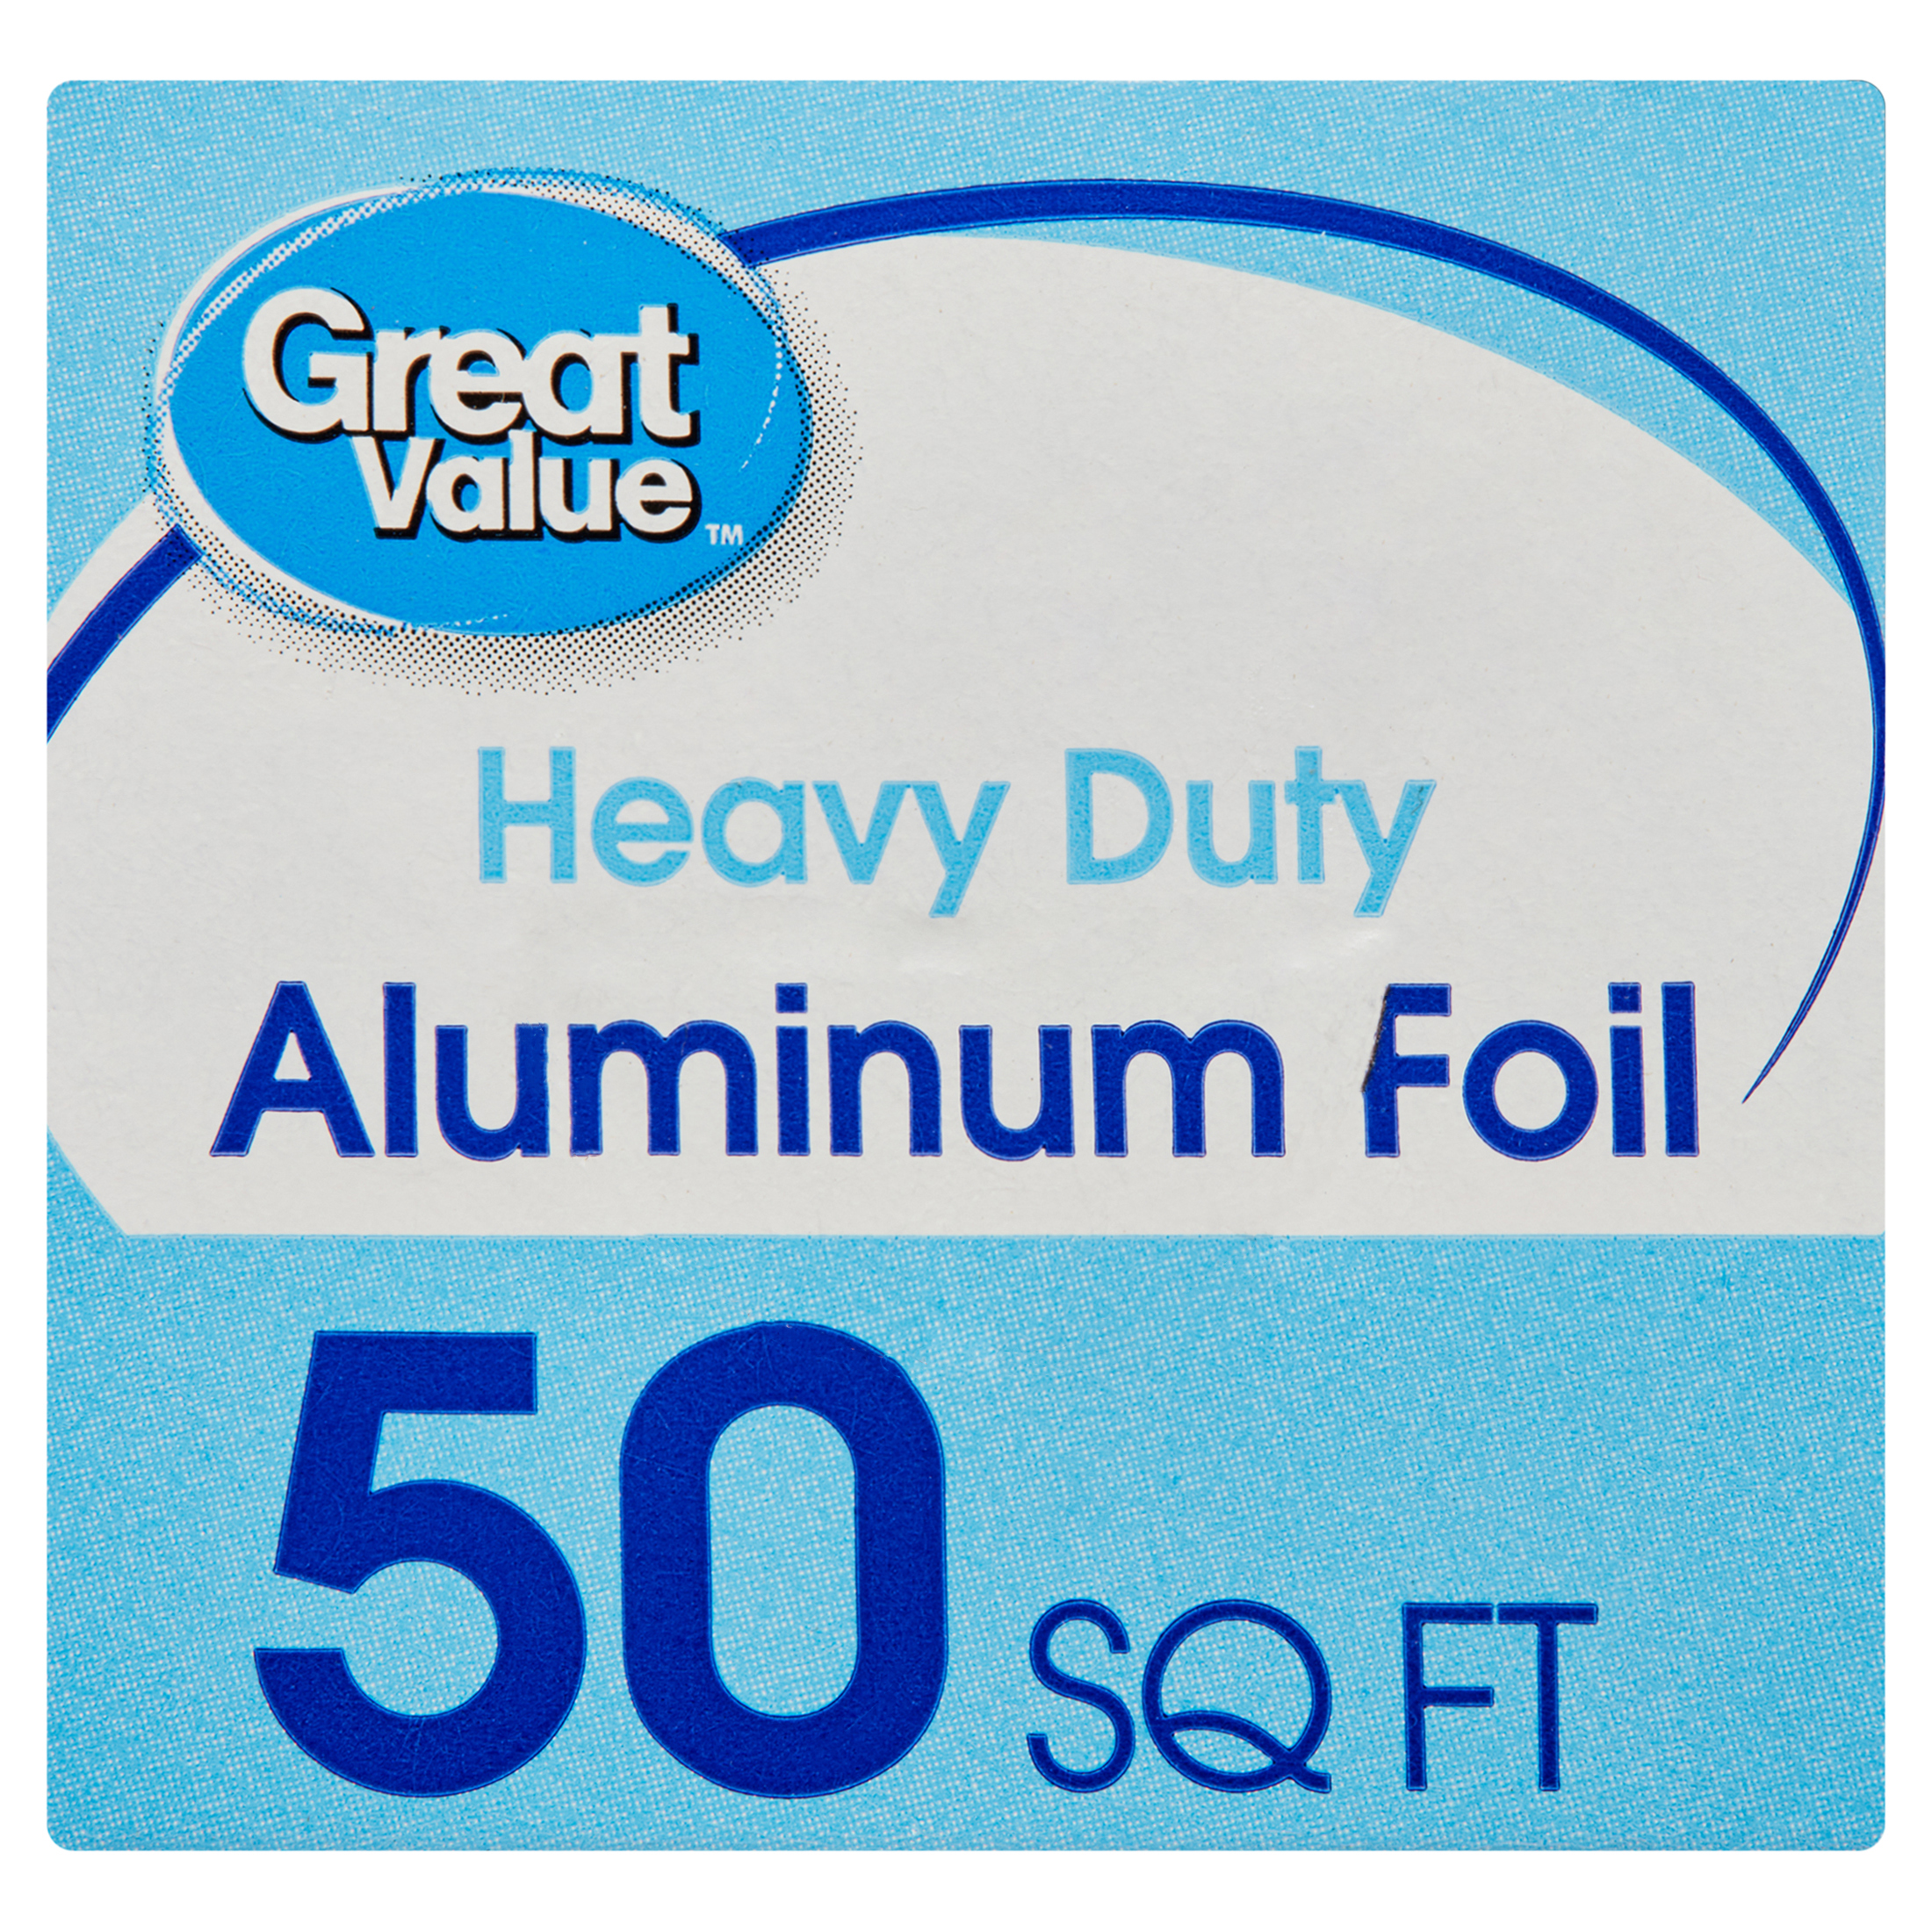 Great Value Heavy Duty Aluminum Foil, 50 sq ft - image 5 of 7